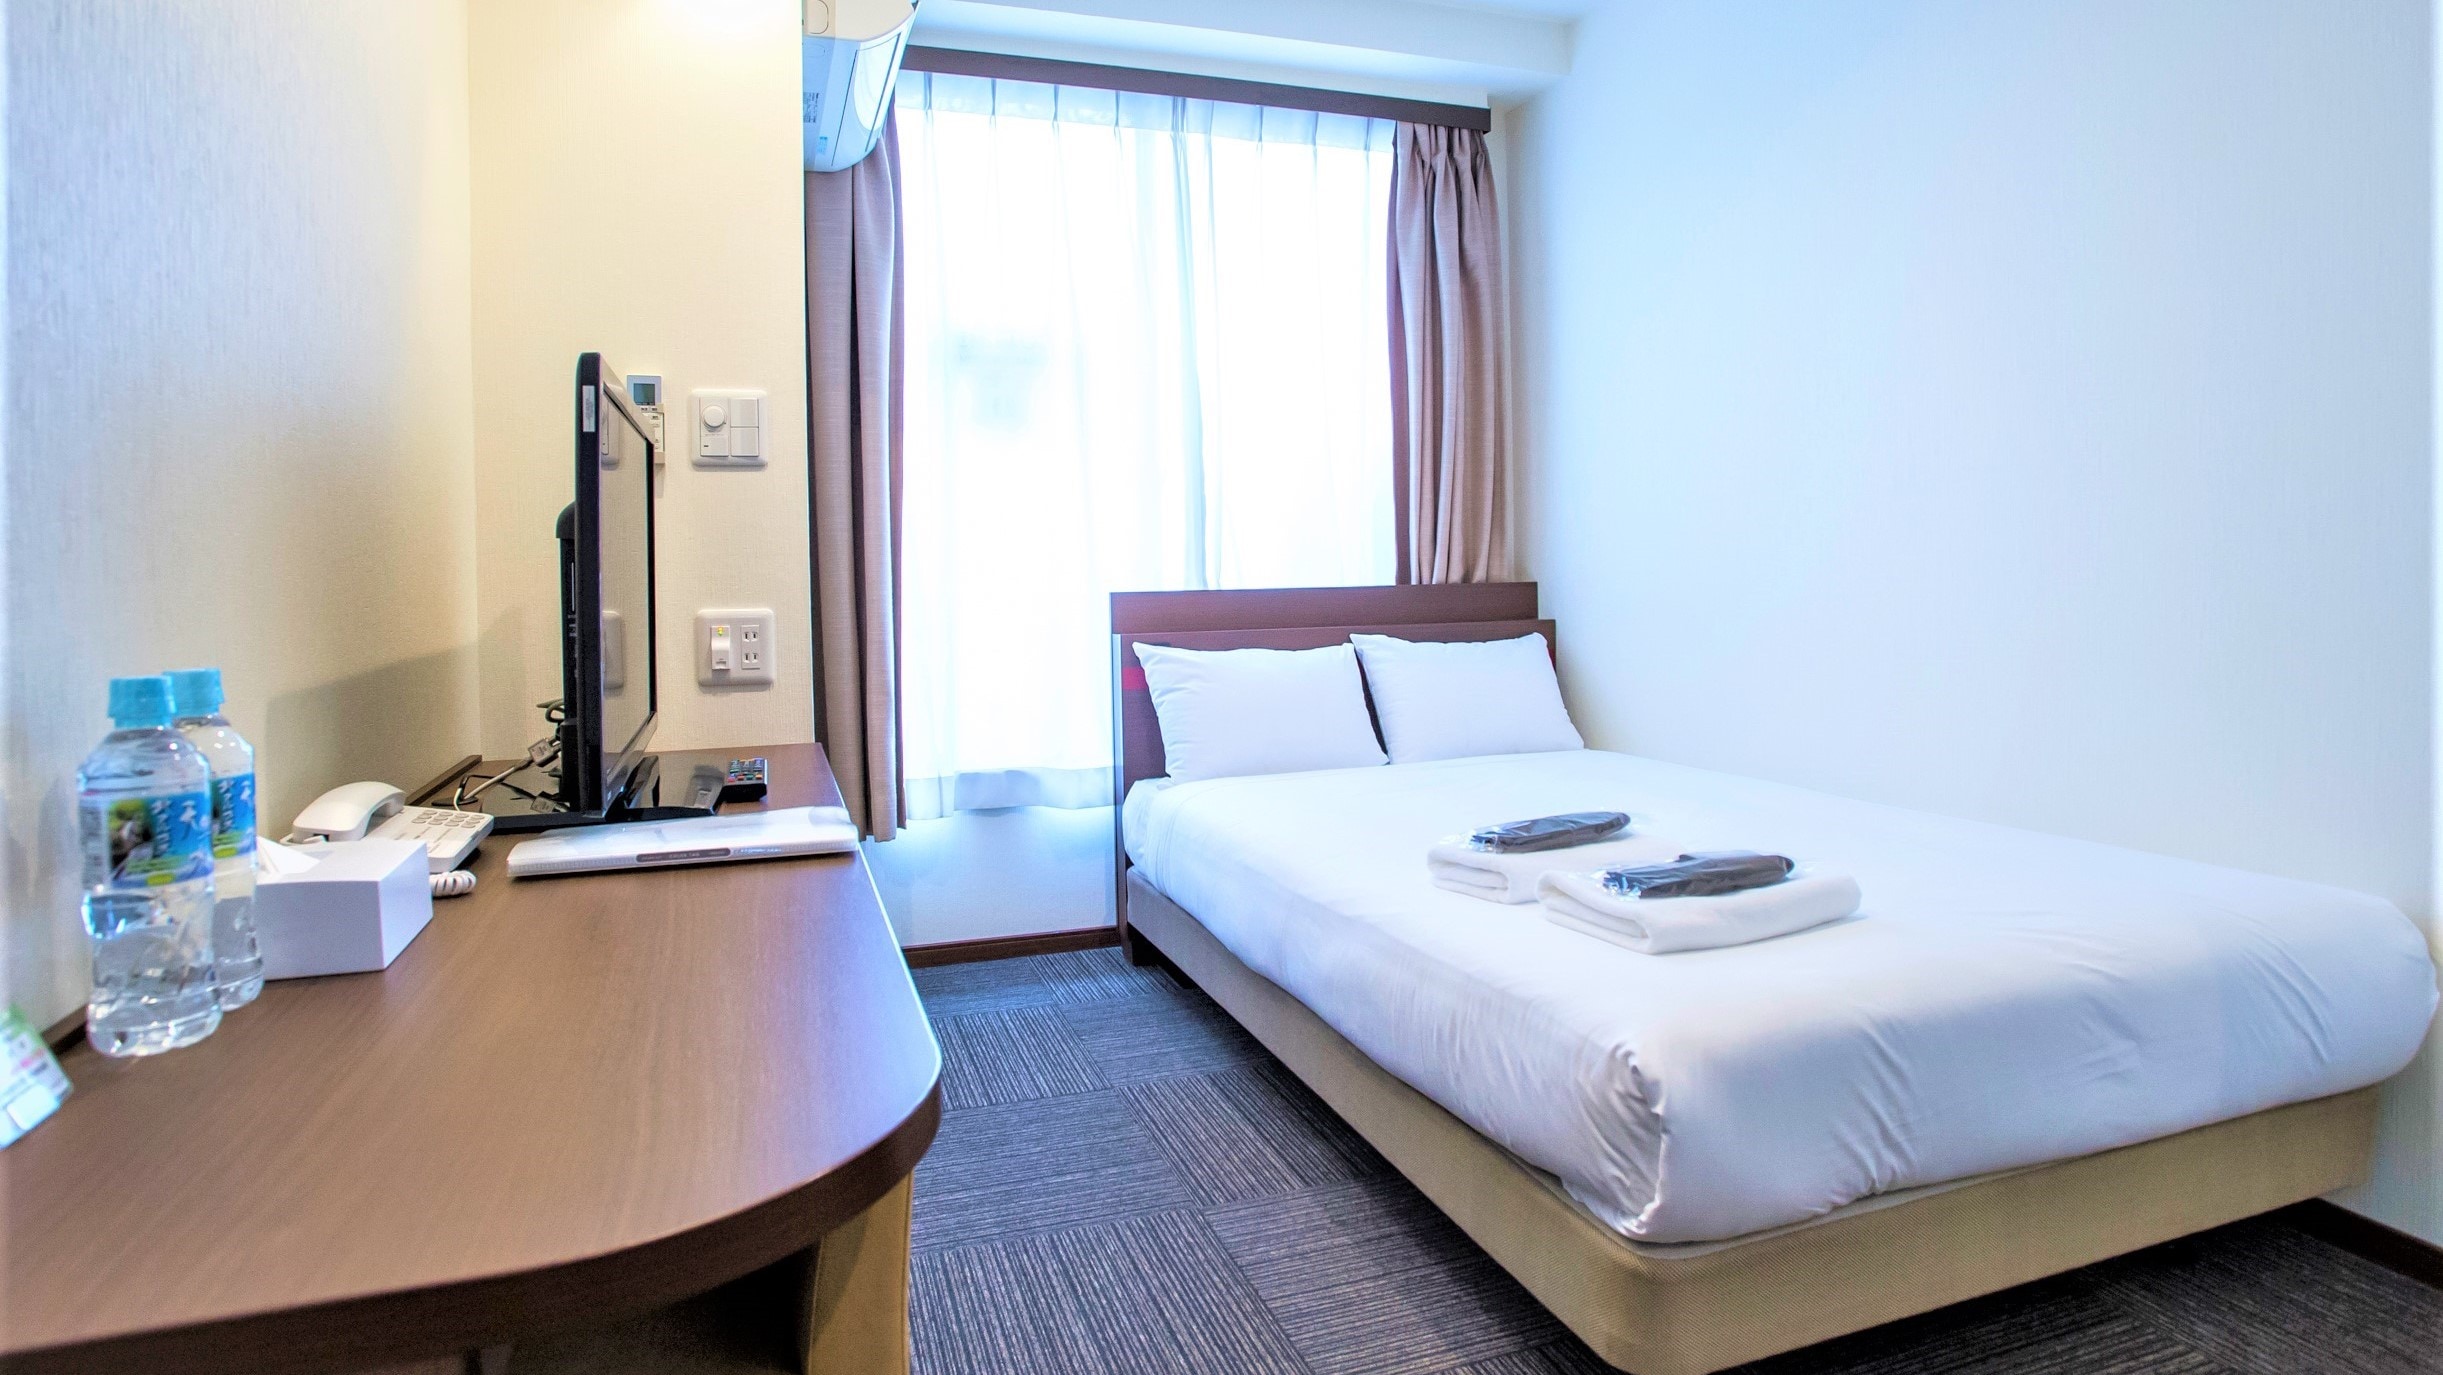 Economy Double Room (Semi-Double) Area 9㎡-10㎡ ・ All rooms are Simmons beds ♪ All rooms are equipped with washlets ♪